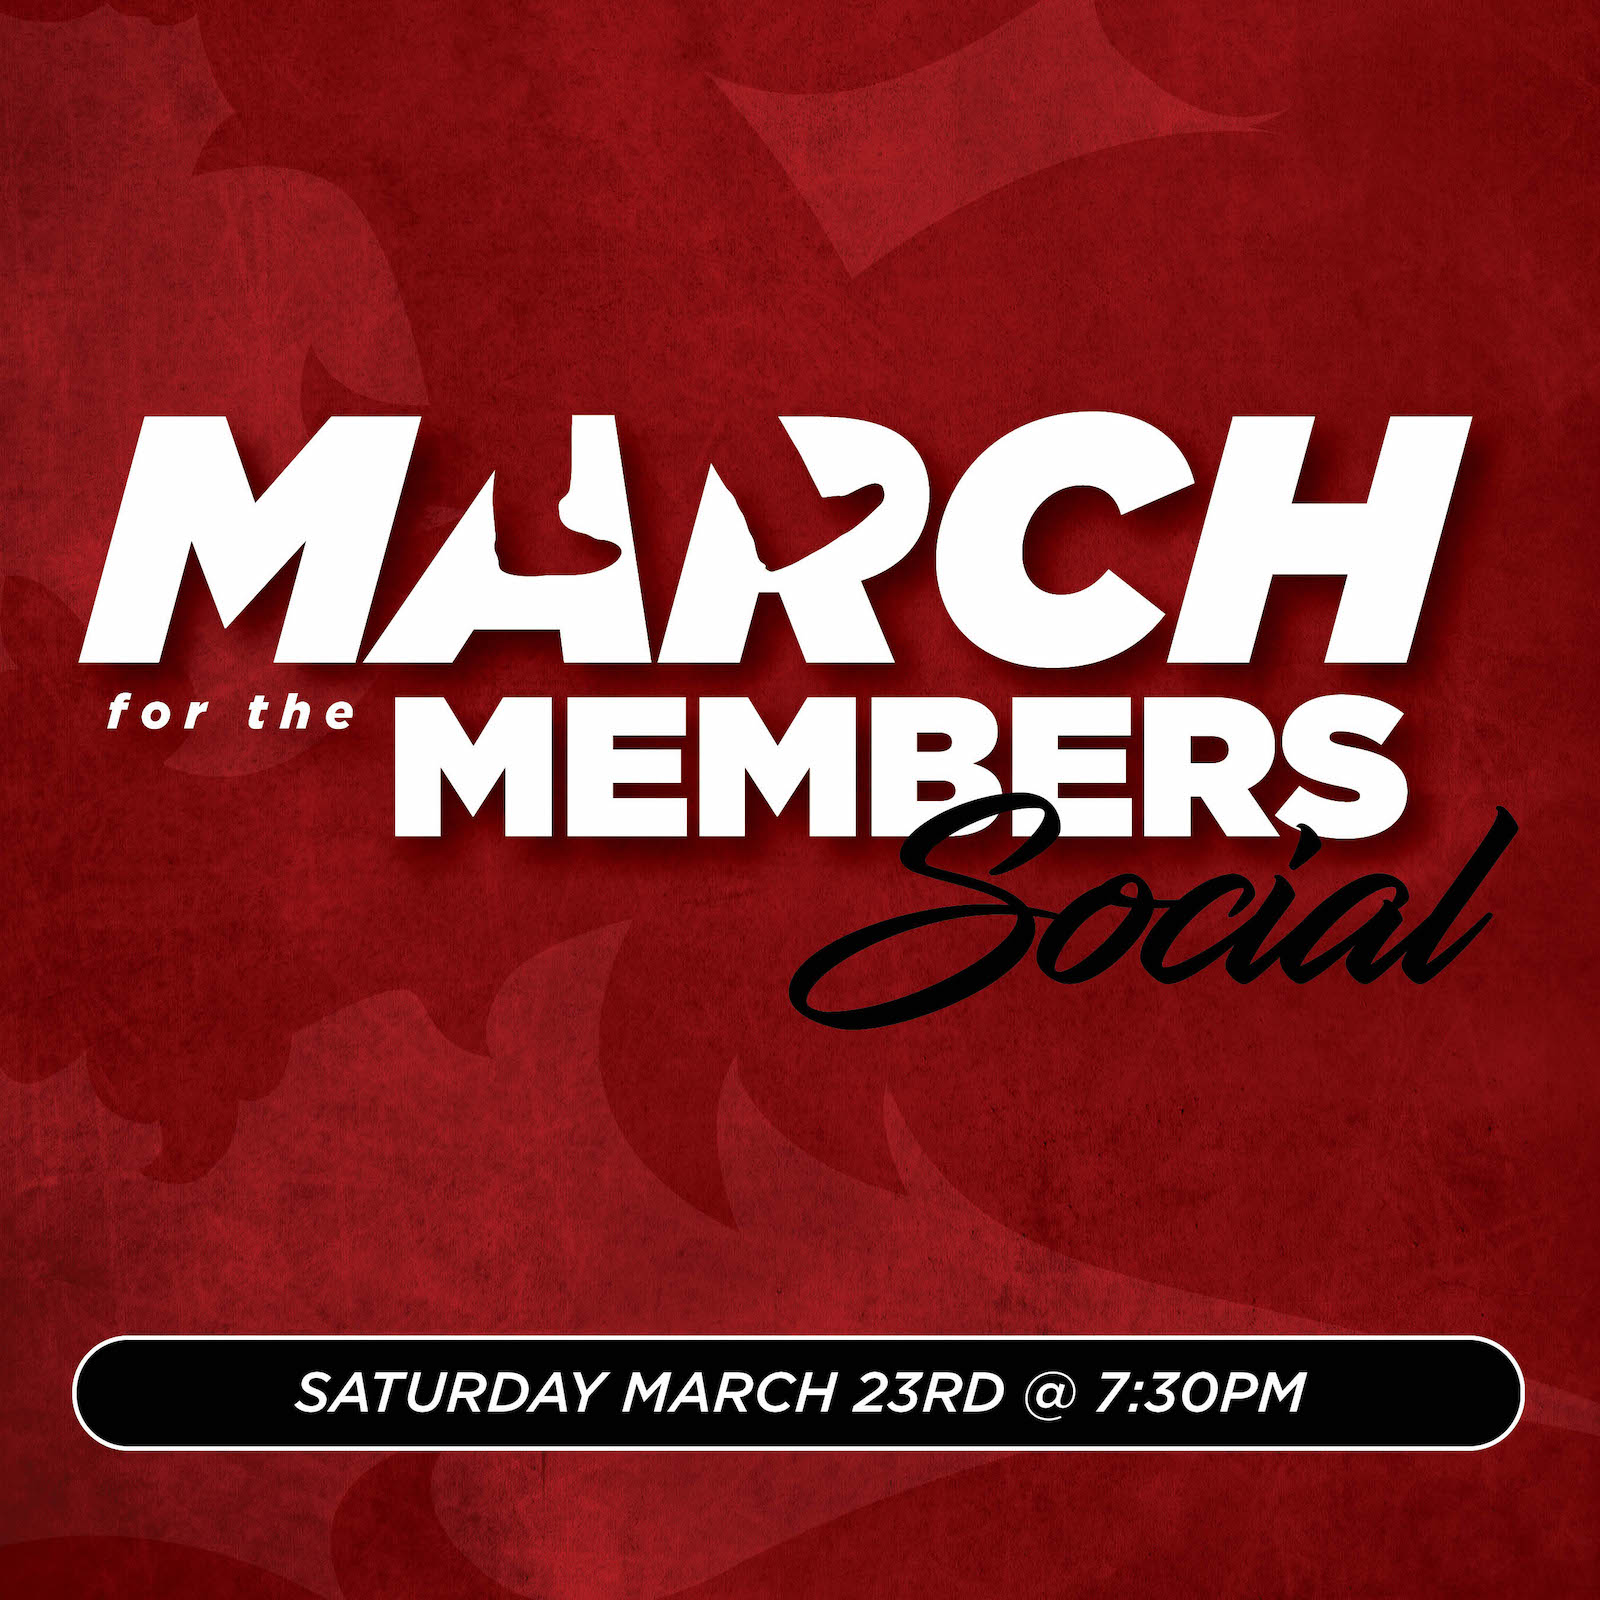 March for the Members Social